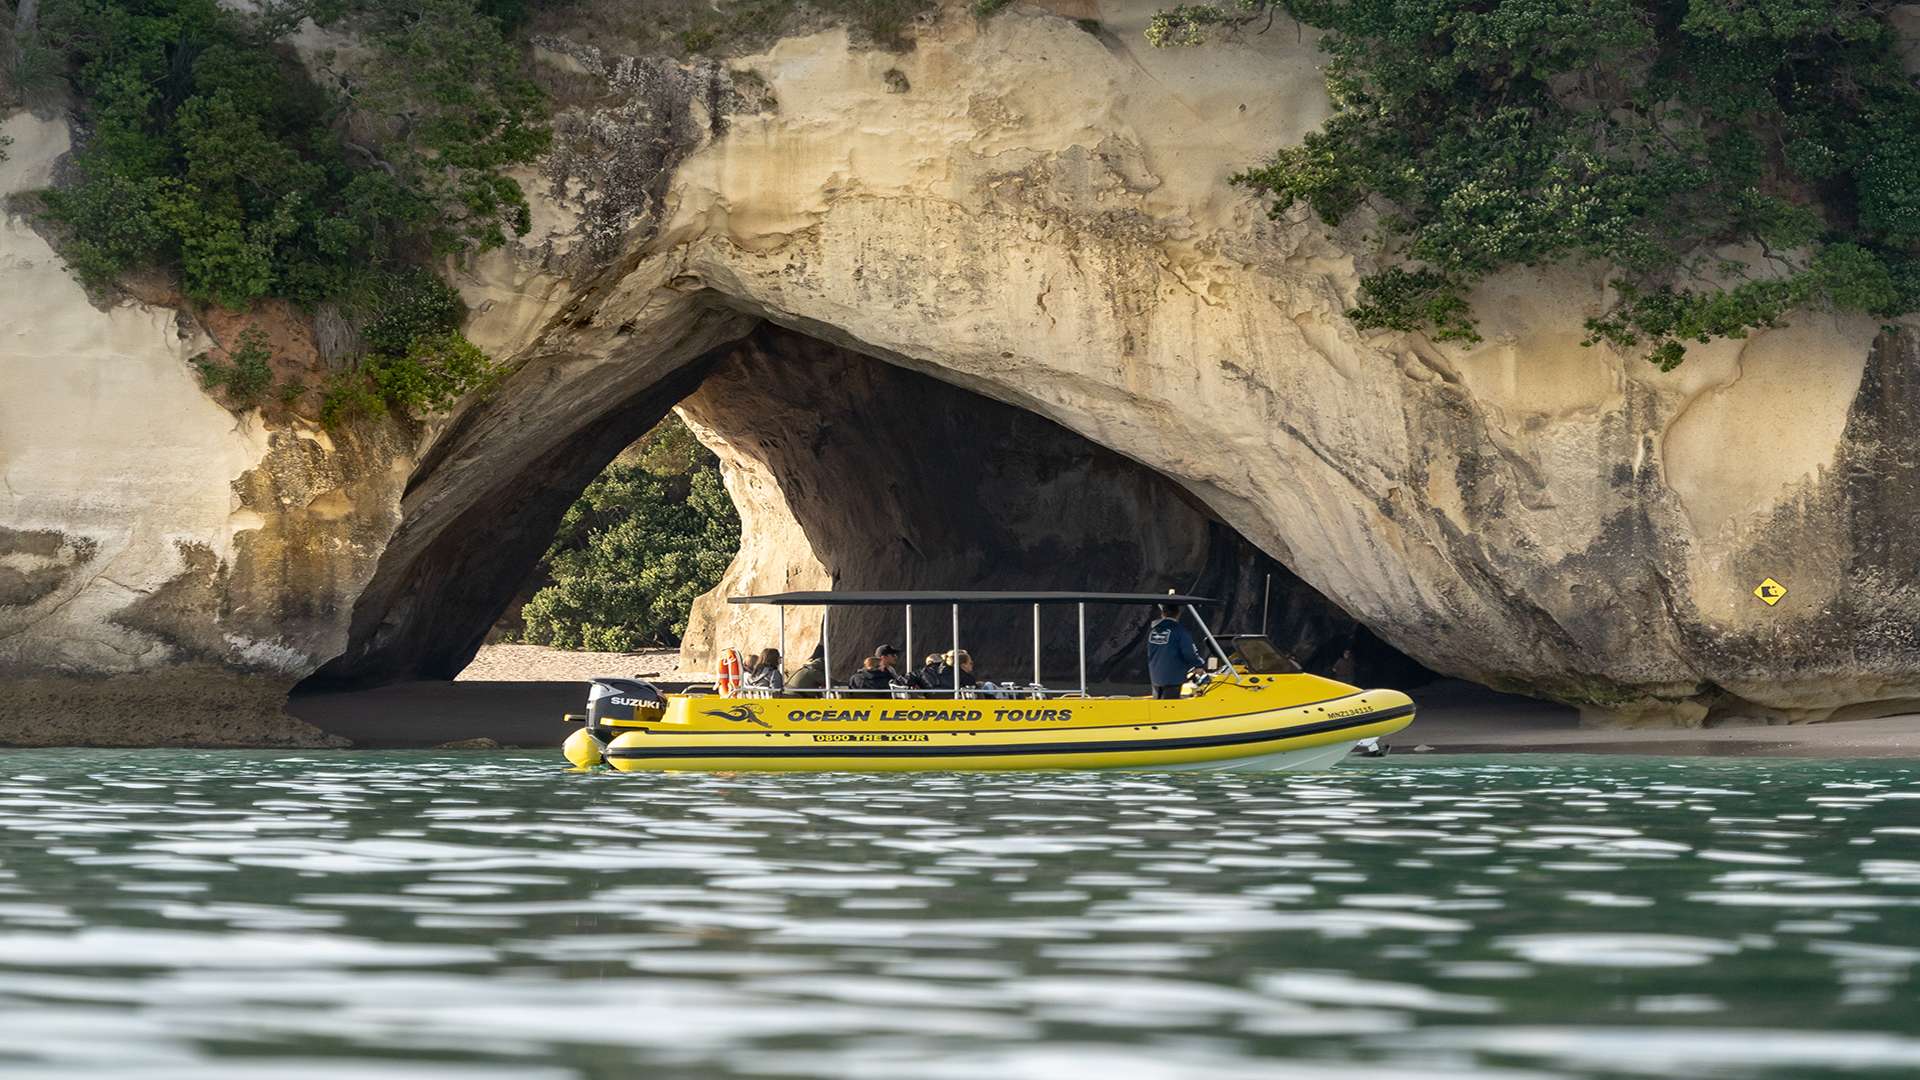 cathedral cove boat tour reviews